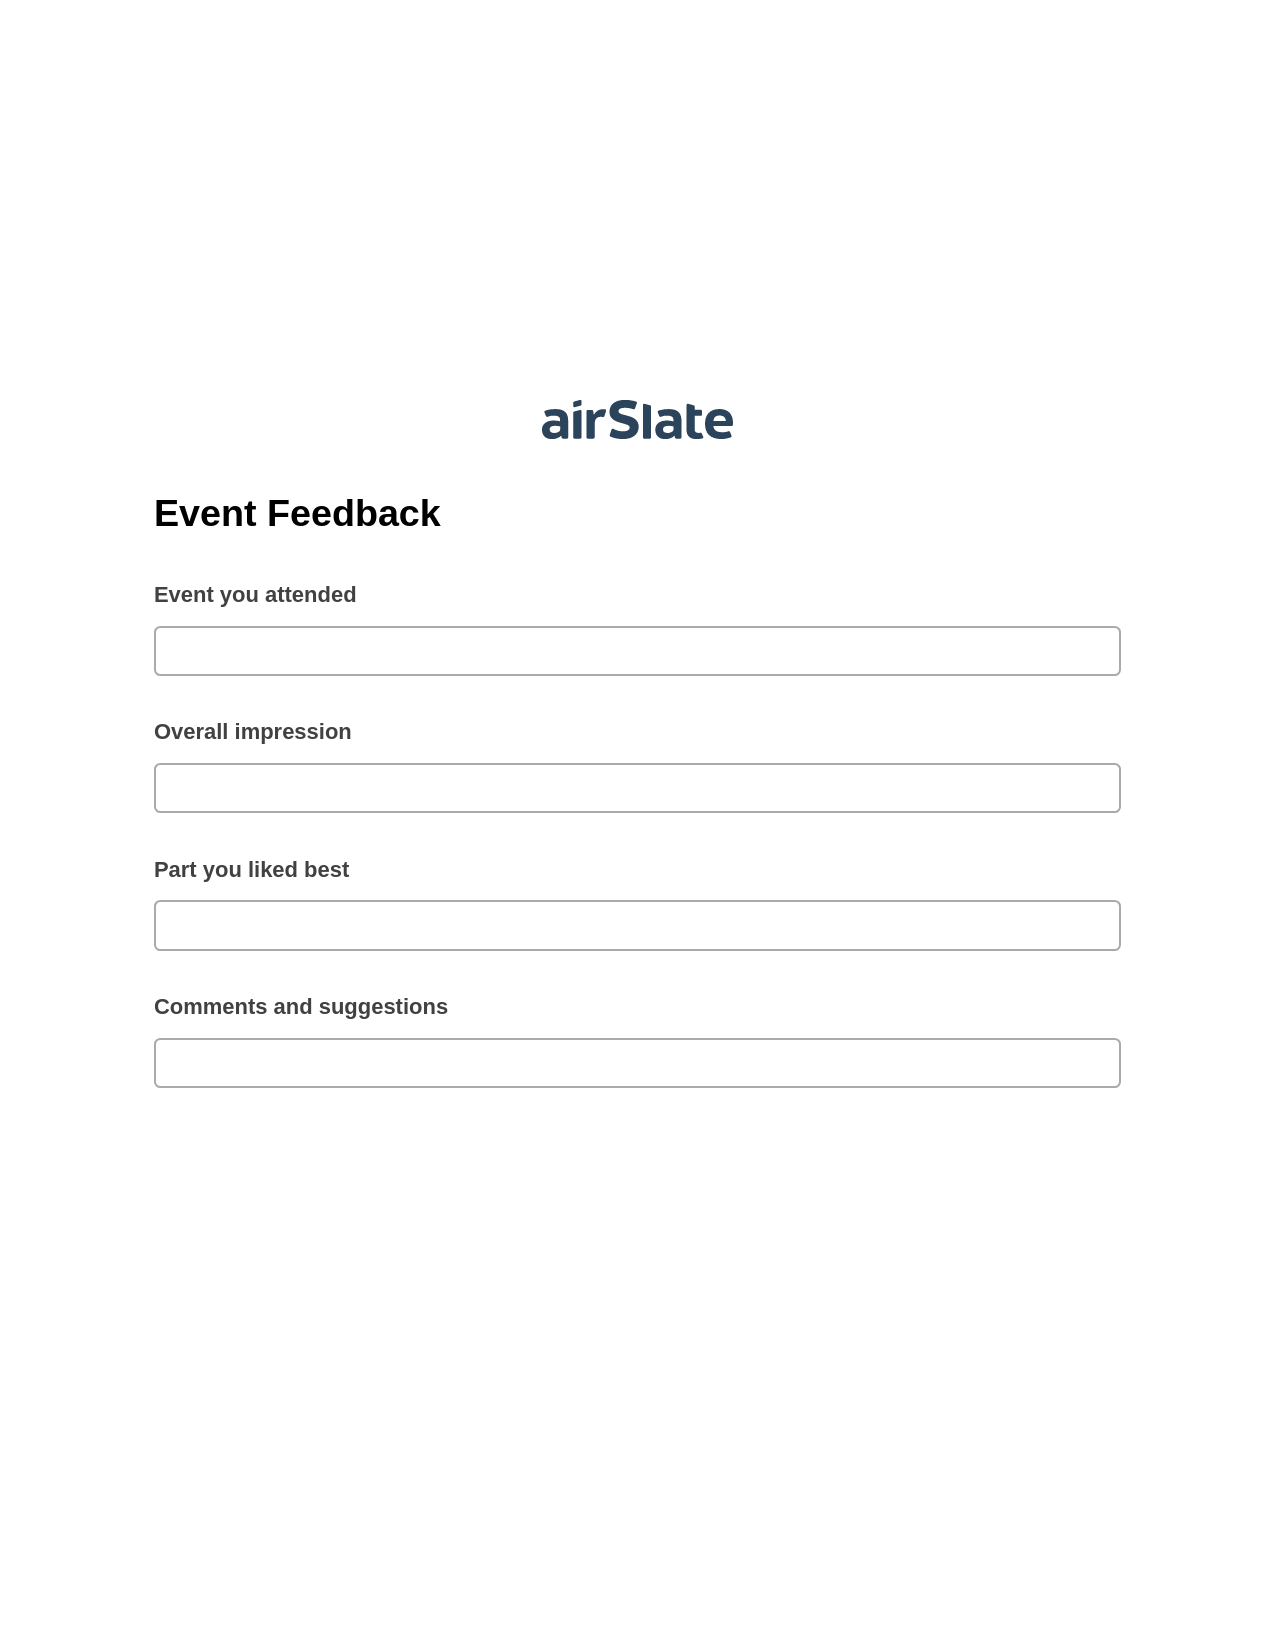 Event Feedback Pre-fill Dropdown from Airtable, Update Salesforce Record Bot, Export to Formstack Documents Bot